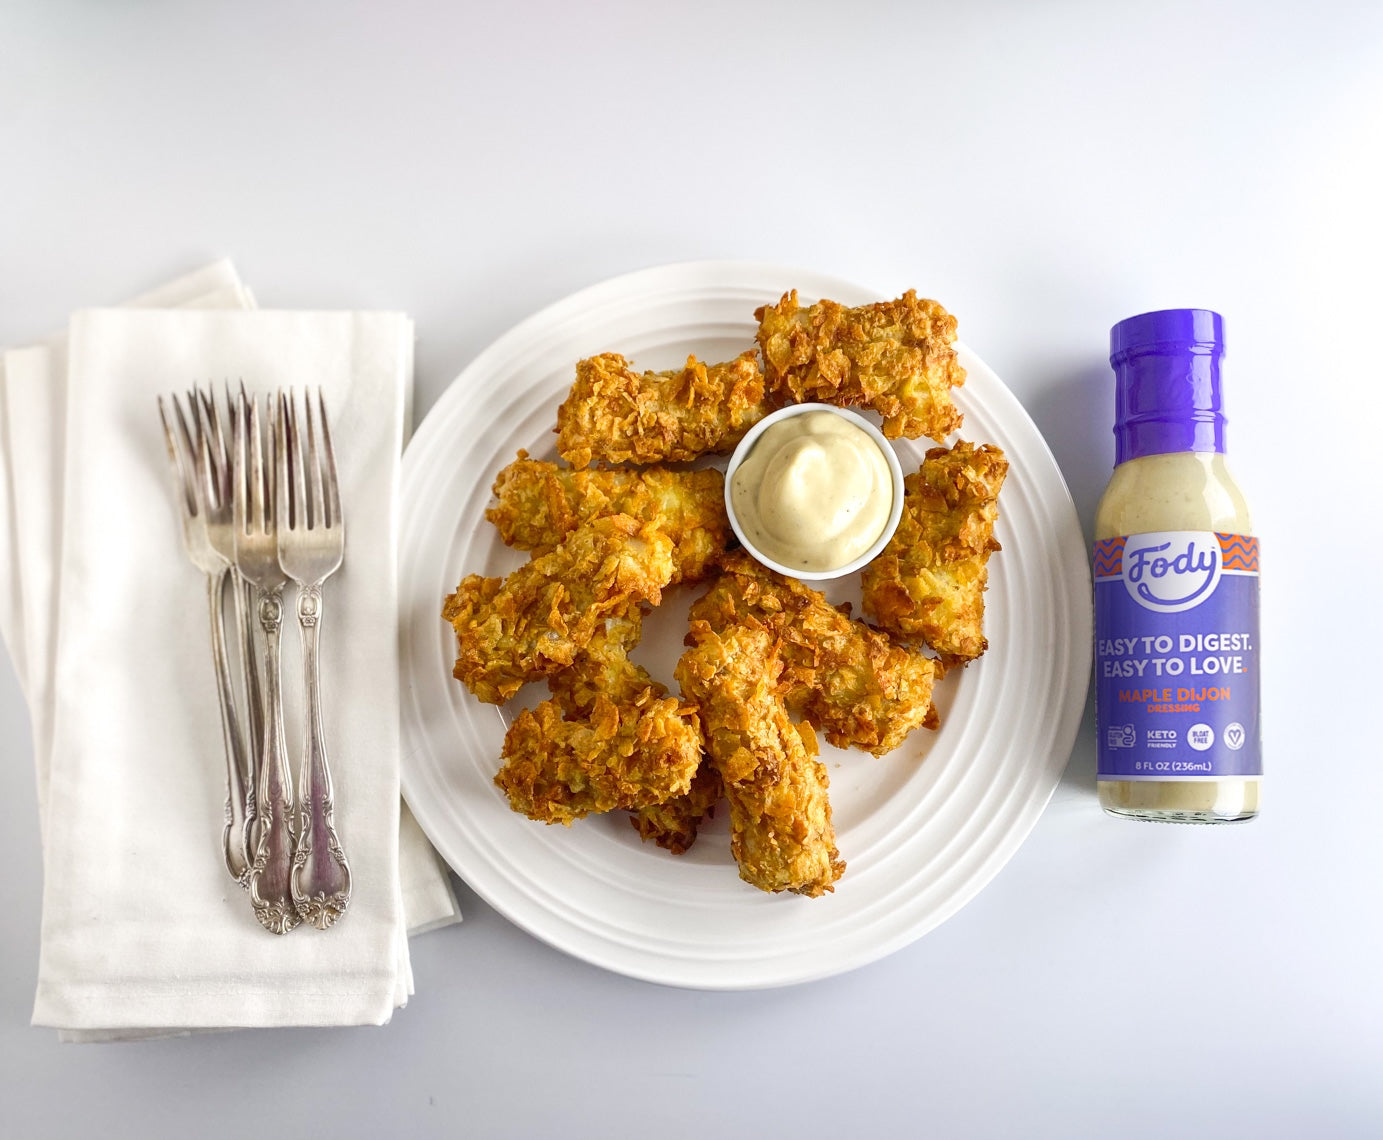 Fody's crunchy air fryer fish sticks with Low FODMAP maple dijon dip and 3 forks